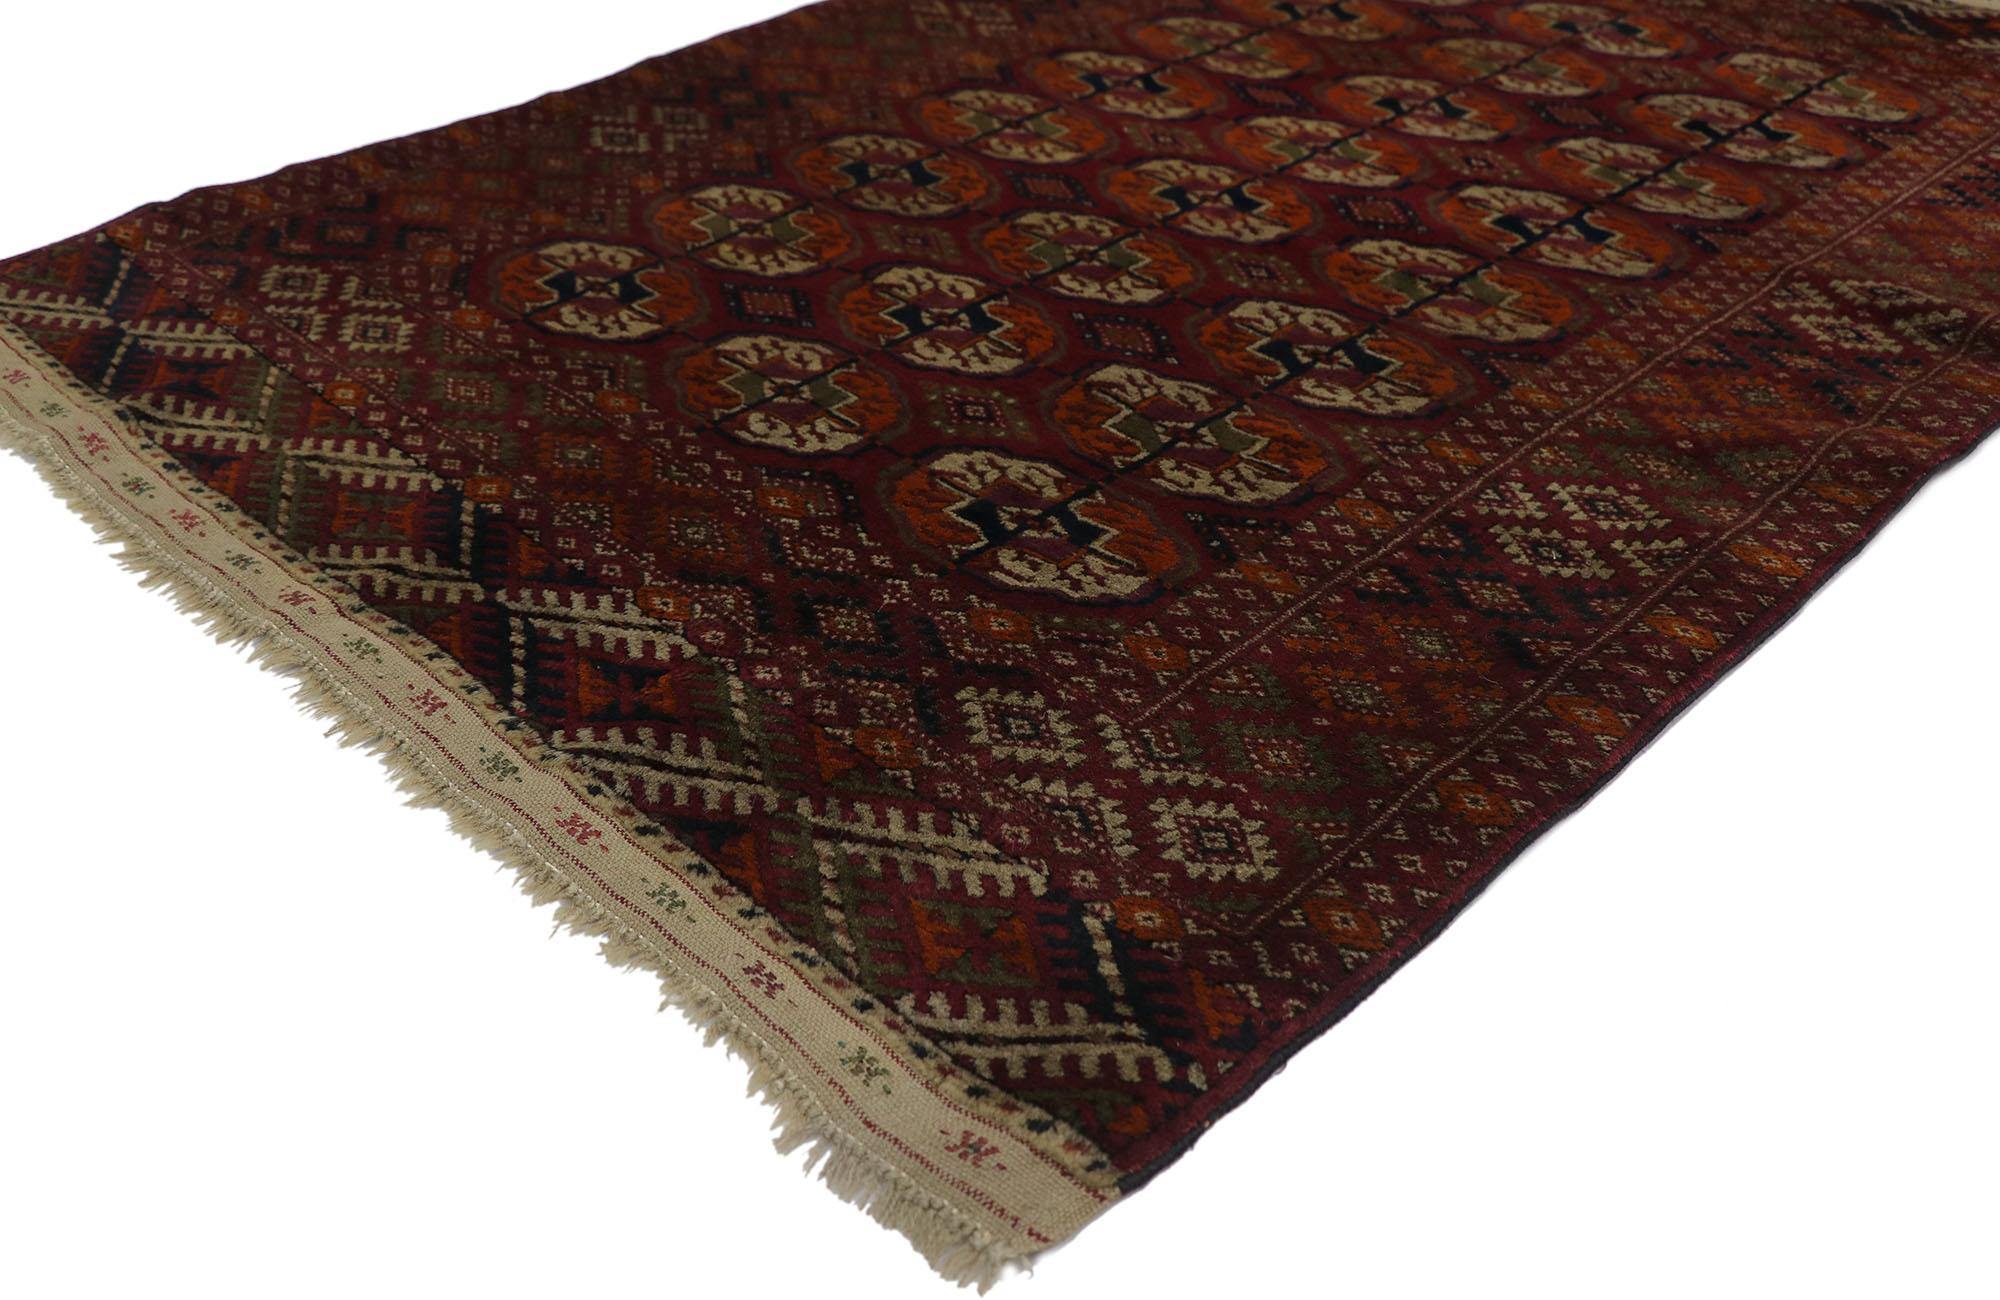 21680 Antique Persian Baluchi Bokhara Rug, 03'06 x 05'00. Warm and inviting with a bold expressive design and tribal style, this hand-knotted wool antique Persian Baluchi Bokhara rug is a captivating vision of woven beauty. The abrashed field